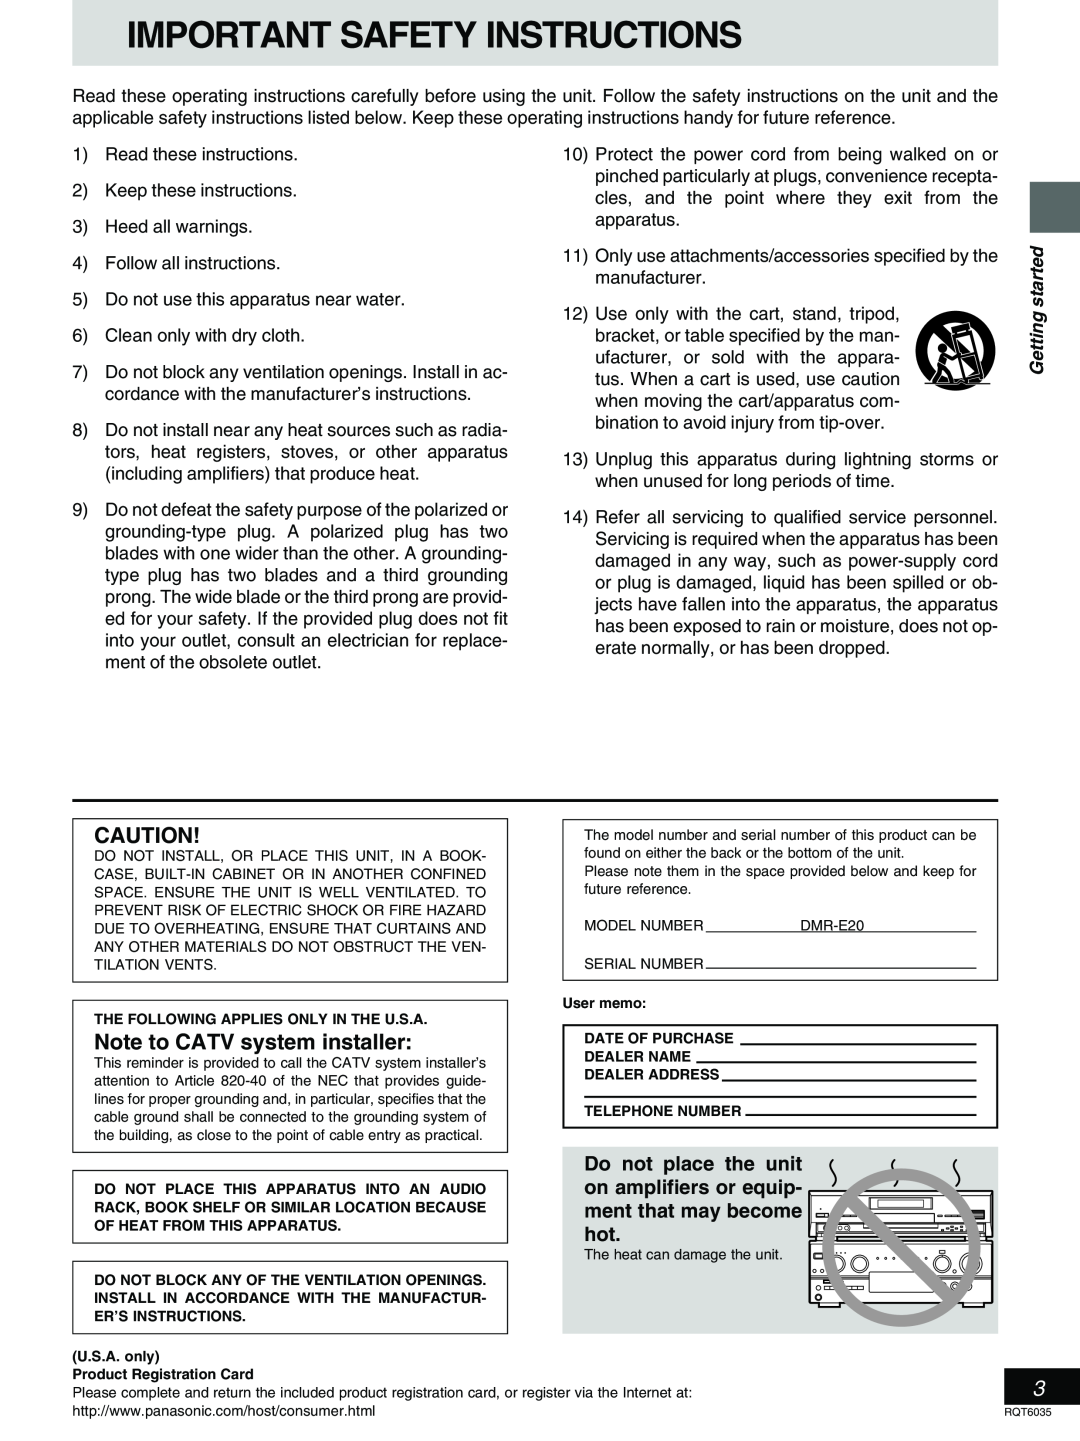 Panasonic DMR-E20 warranty Important Safety Instructions, Note to CATV system installer, Getting started 